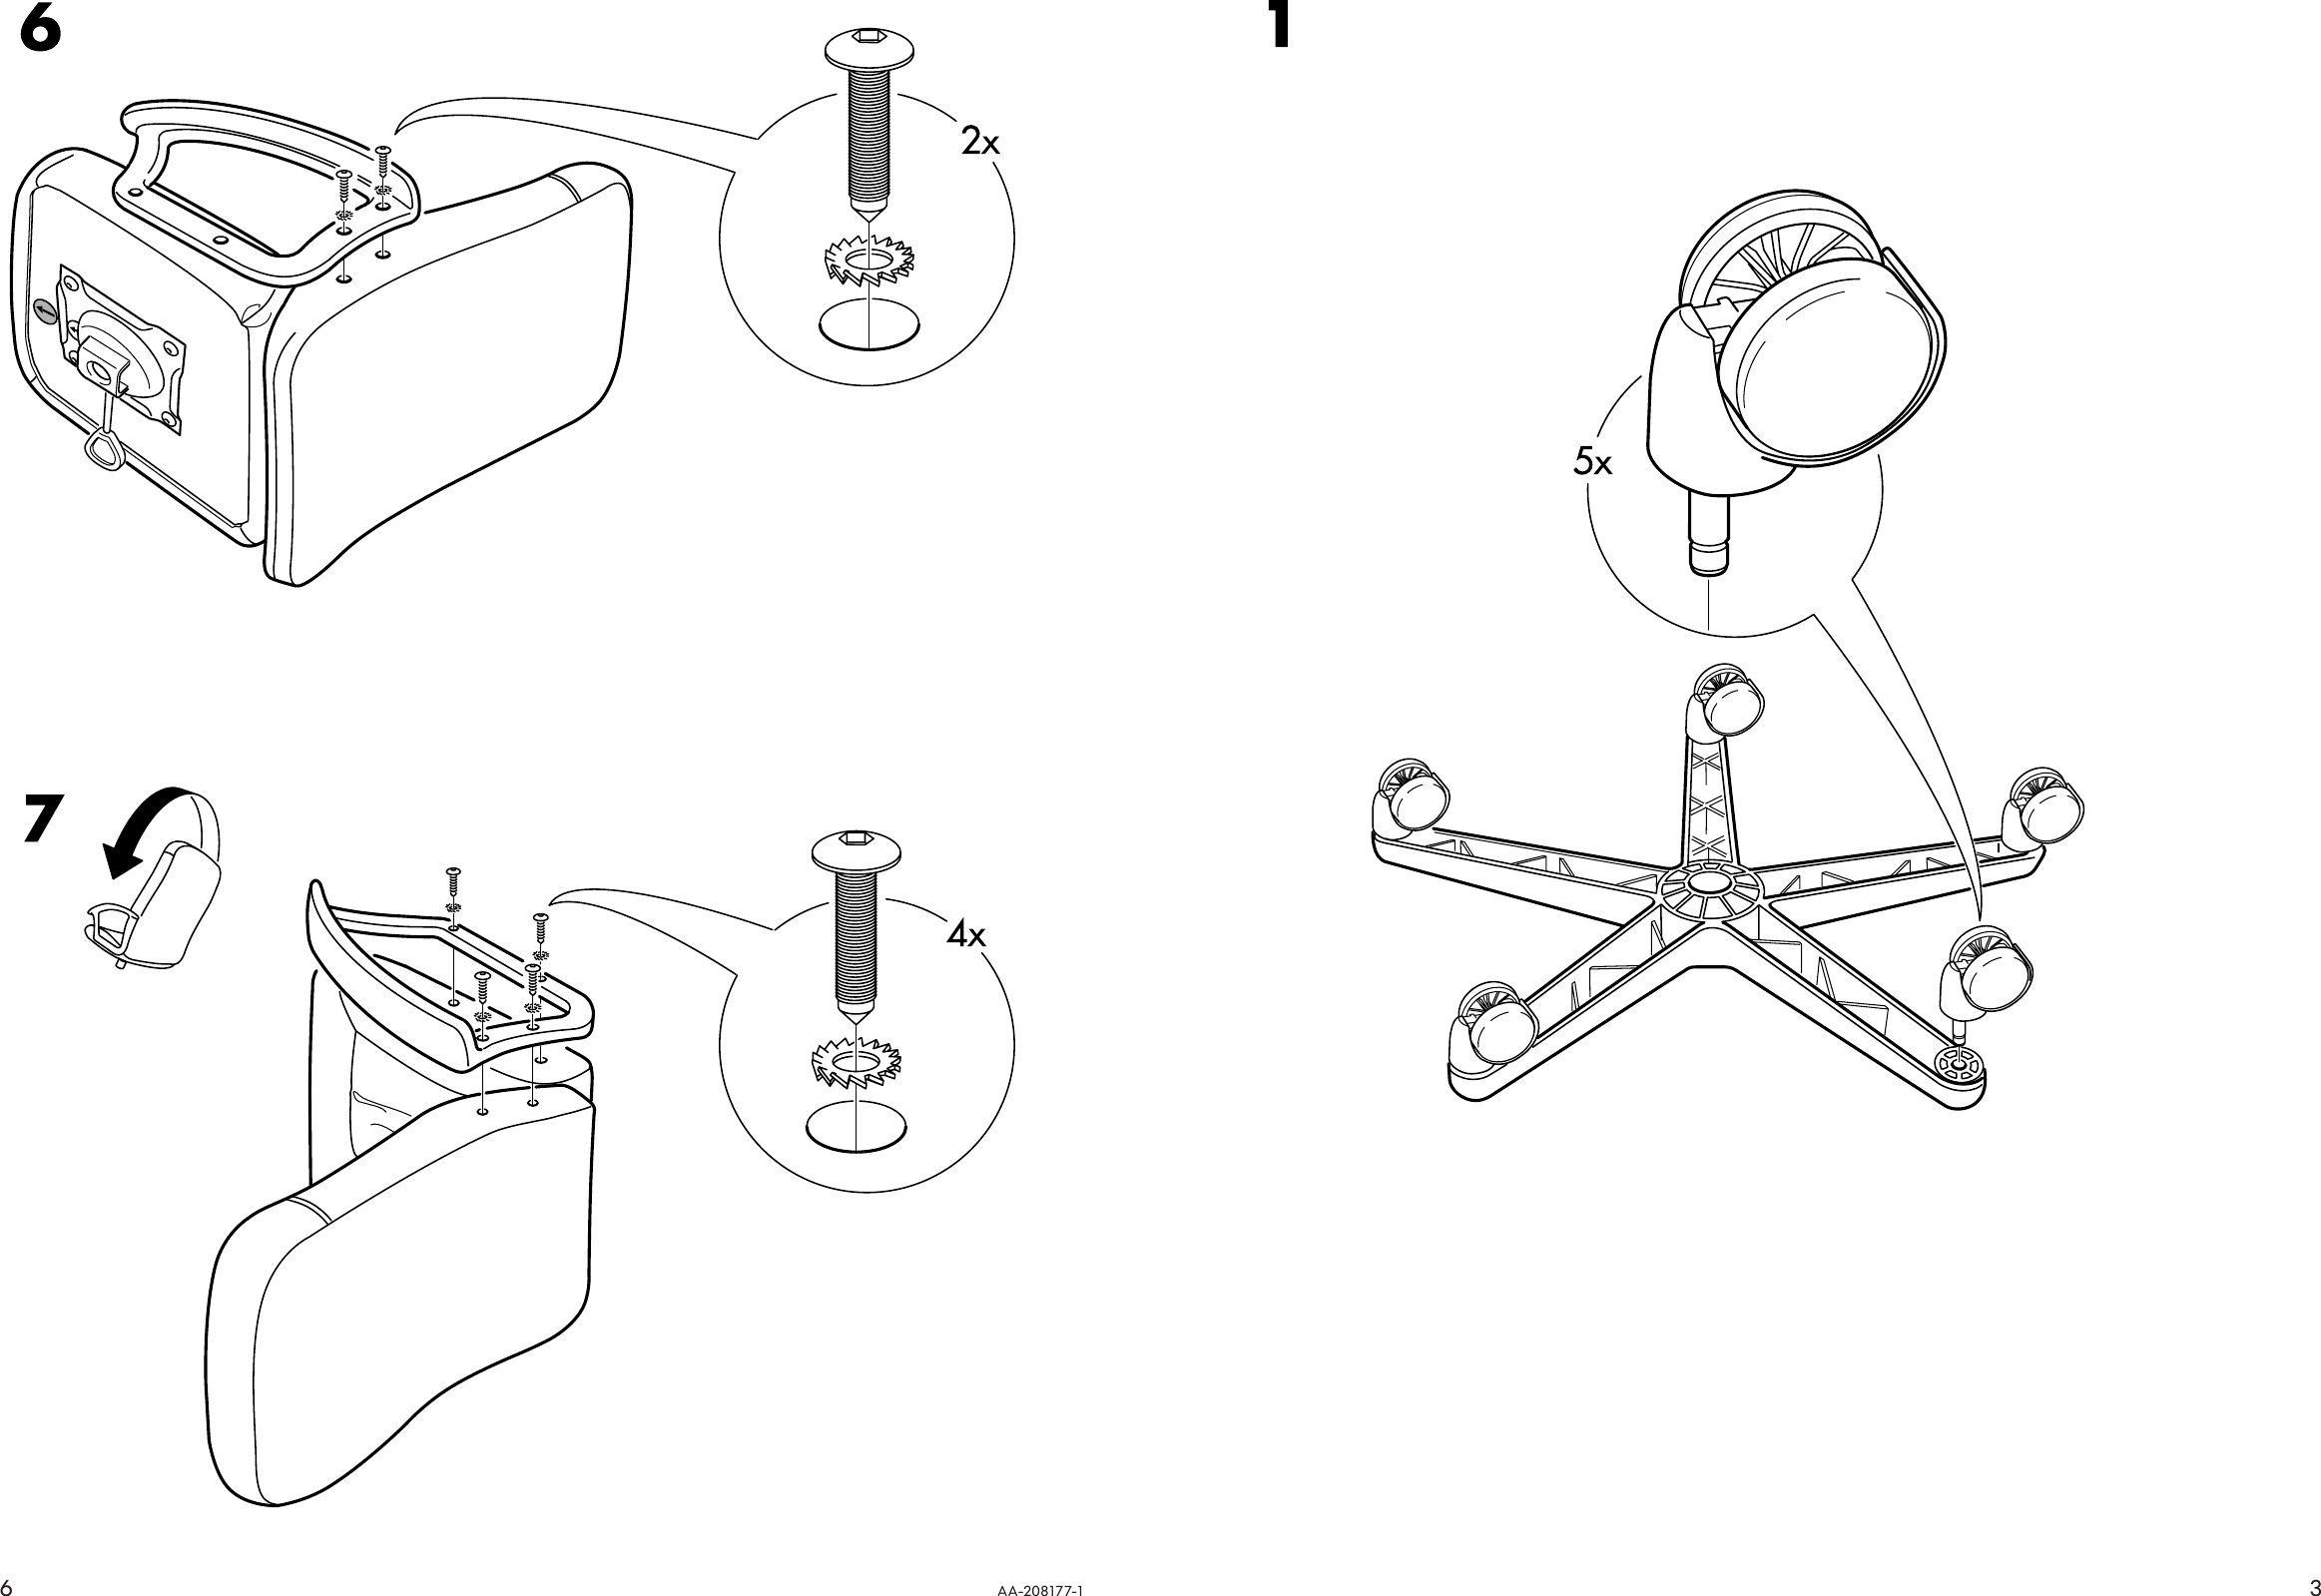 Page 3 of 4 - Ikea Ikea-Moses-Swivel-Chair-Assembly-Instruction